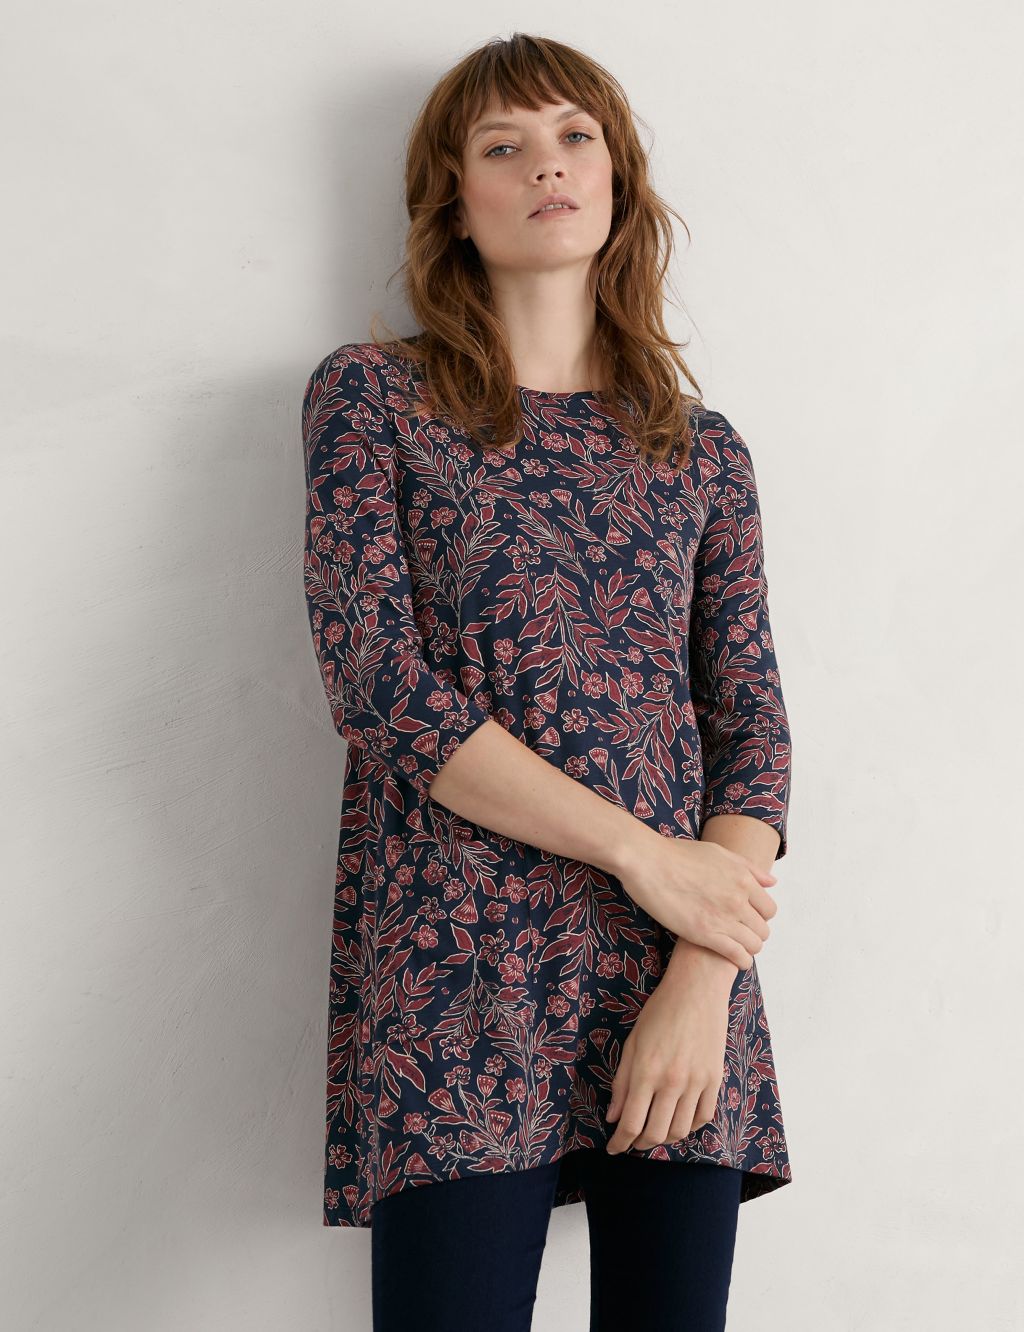 Floral Tunic with Cotton | Seasalt Cornwall | M&S